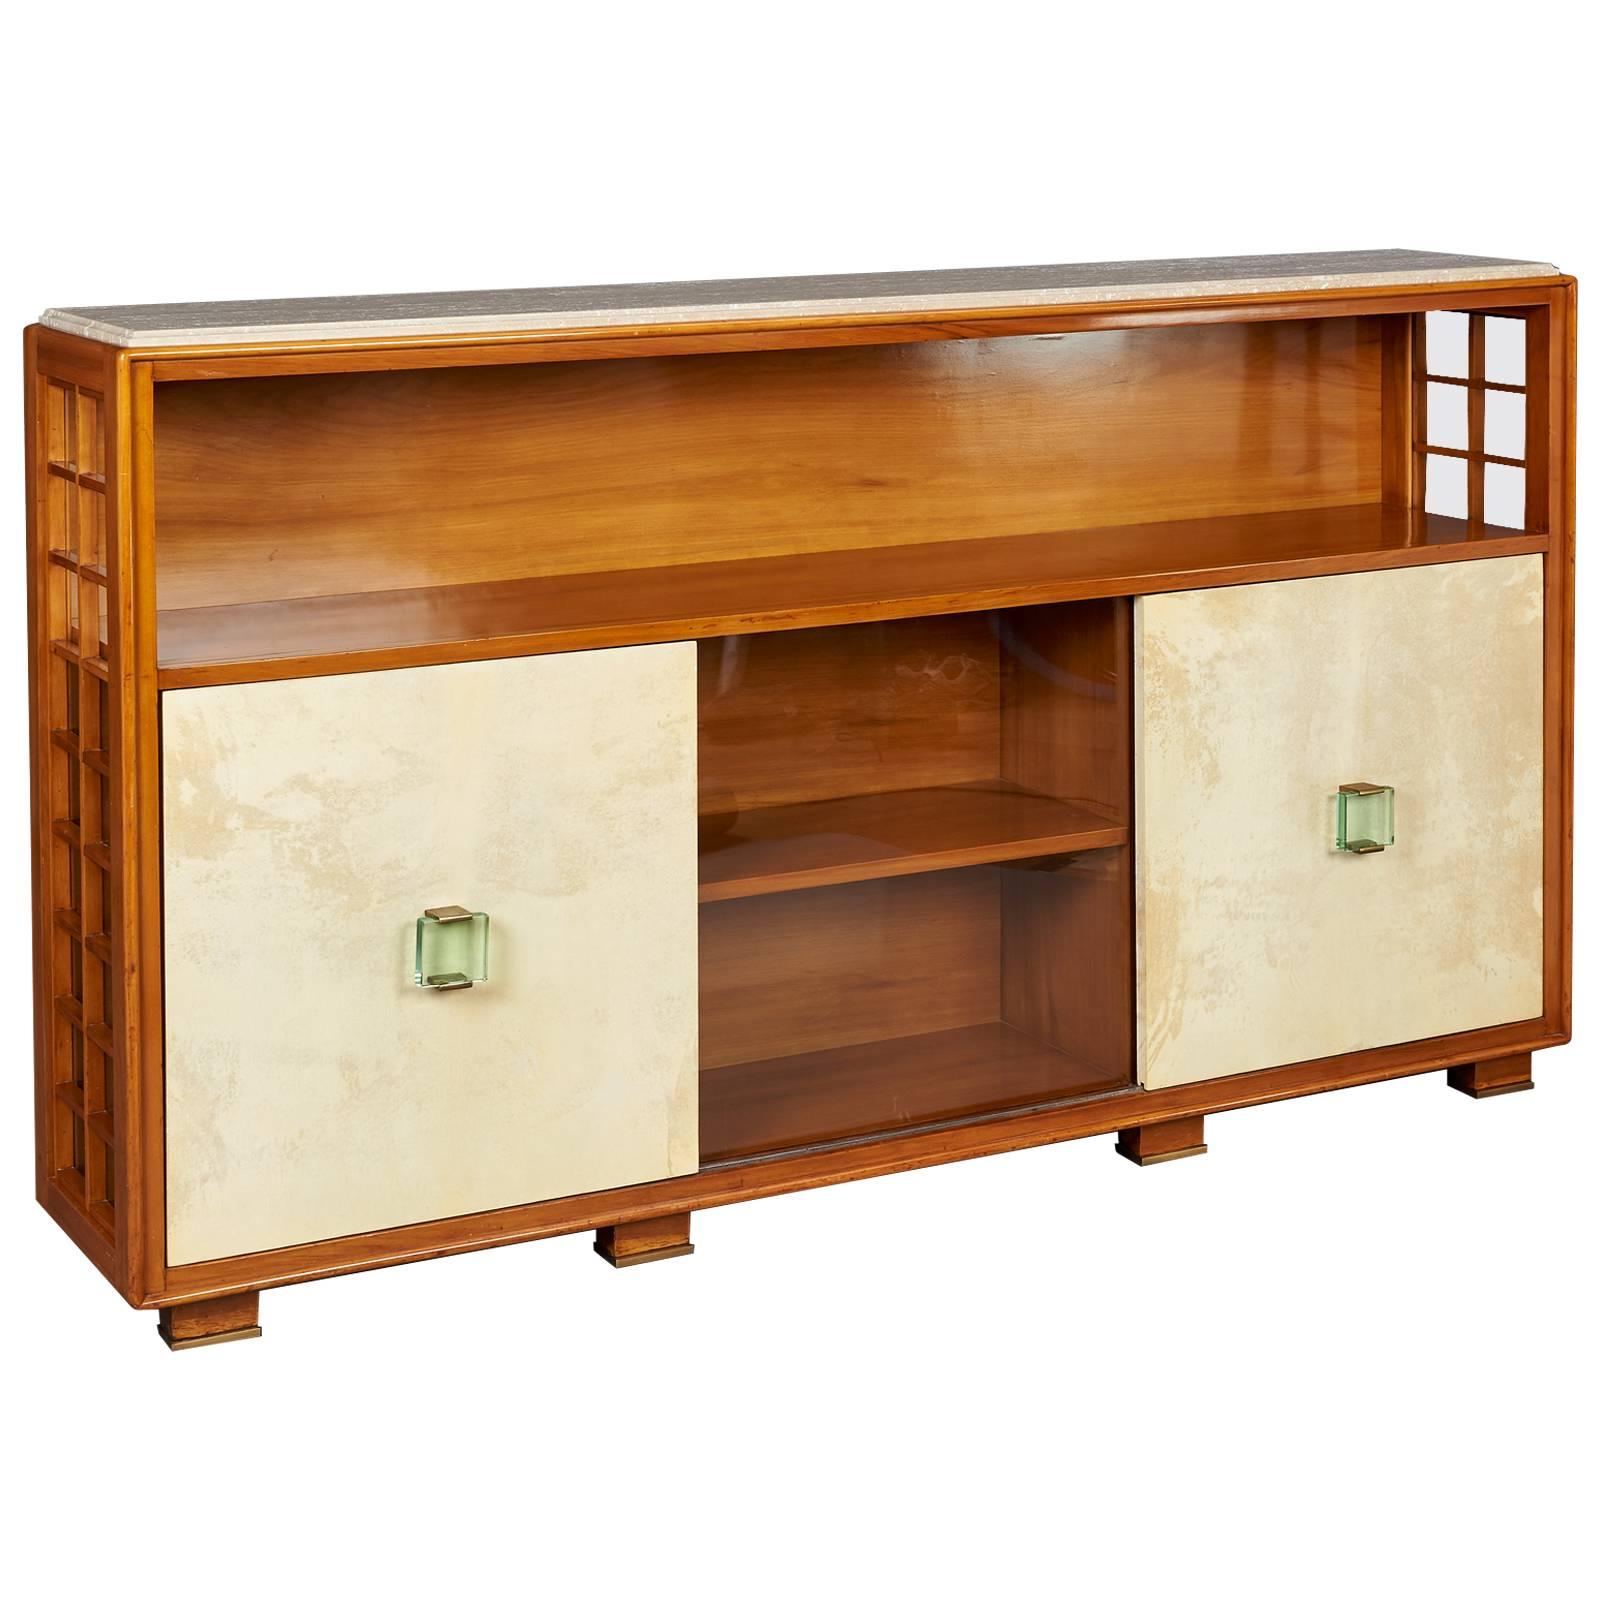 Architectural 1950s Walnut and Parchment Cabinet Attributed to Borsani